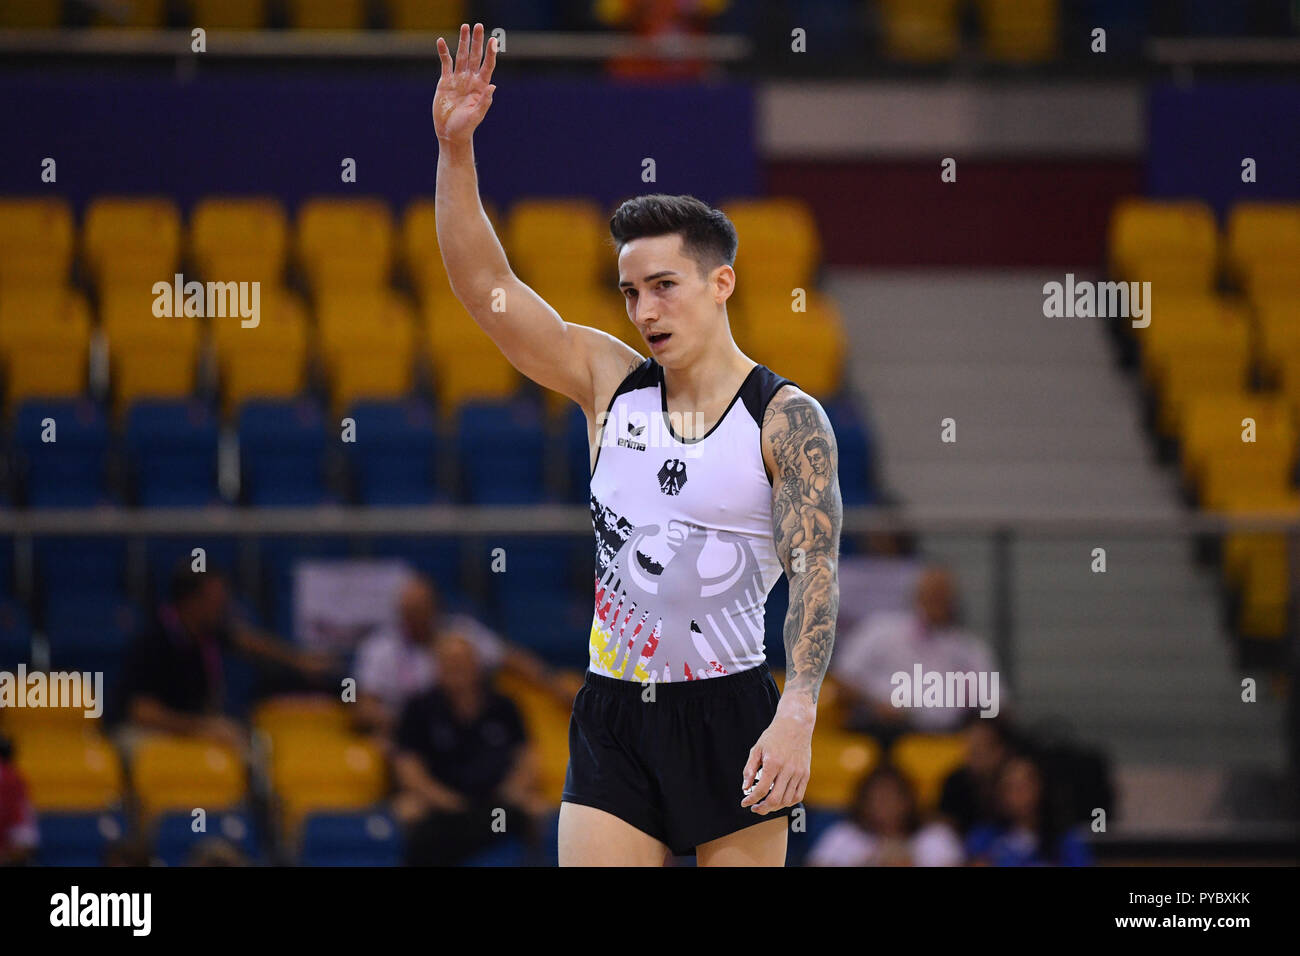 Marcel Nguyen (GER),  October 26, 2018 - Artistic Gymnastics : The 2018 Artistic Gymnastics World Championships, Men's team Qualification Floor at Aspire Dome in Doha, Qatar. (Photo by MATSUO.K/AFLO SPORT) Stock Photo